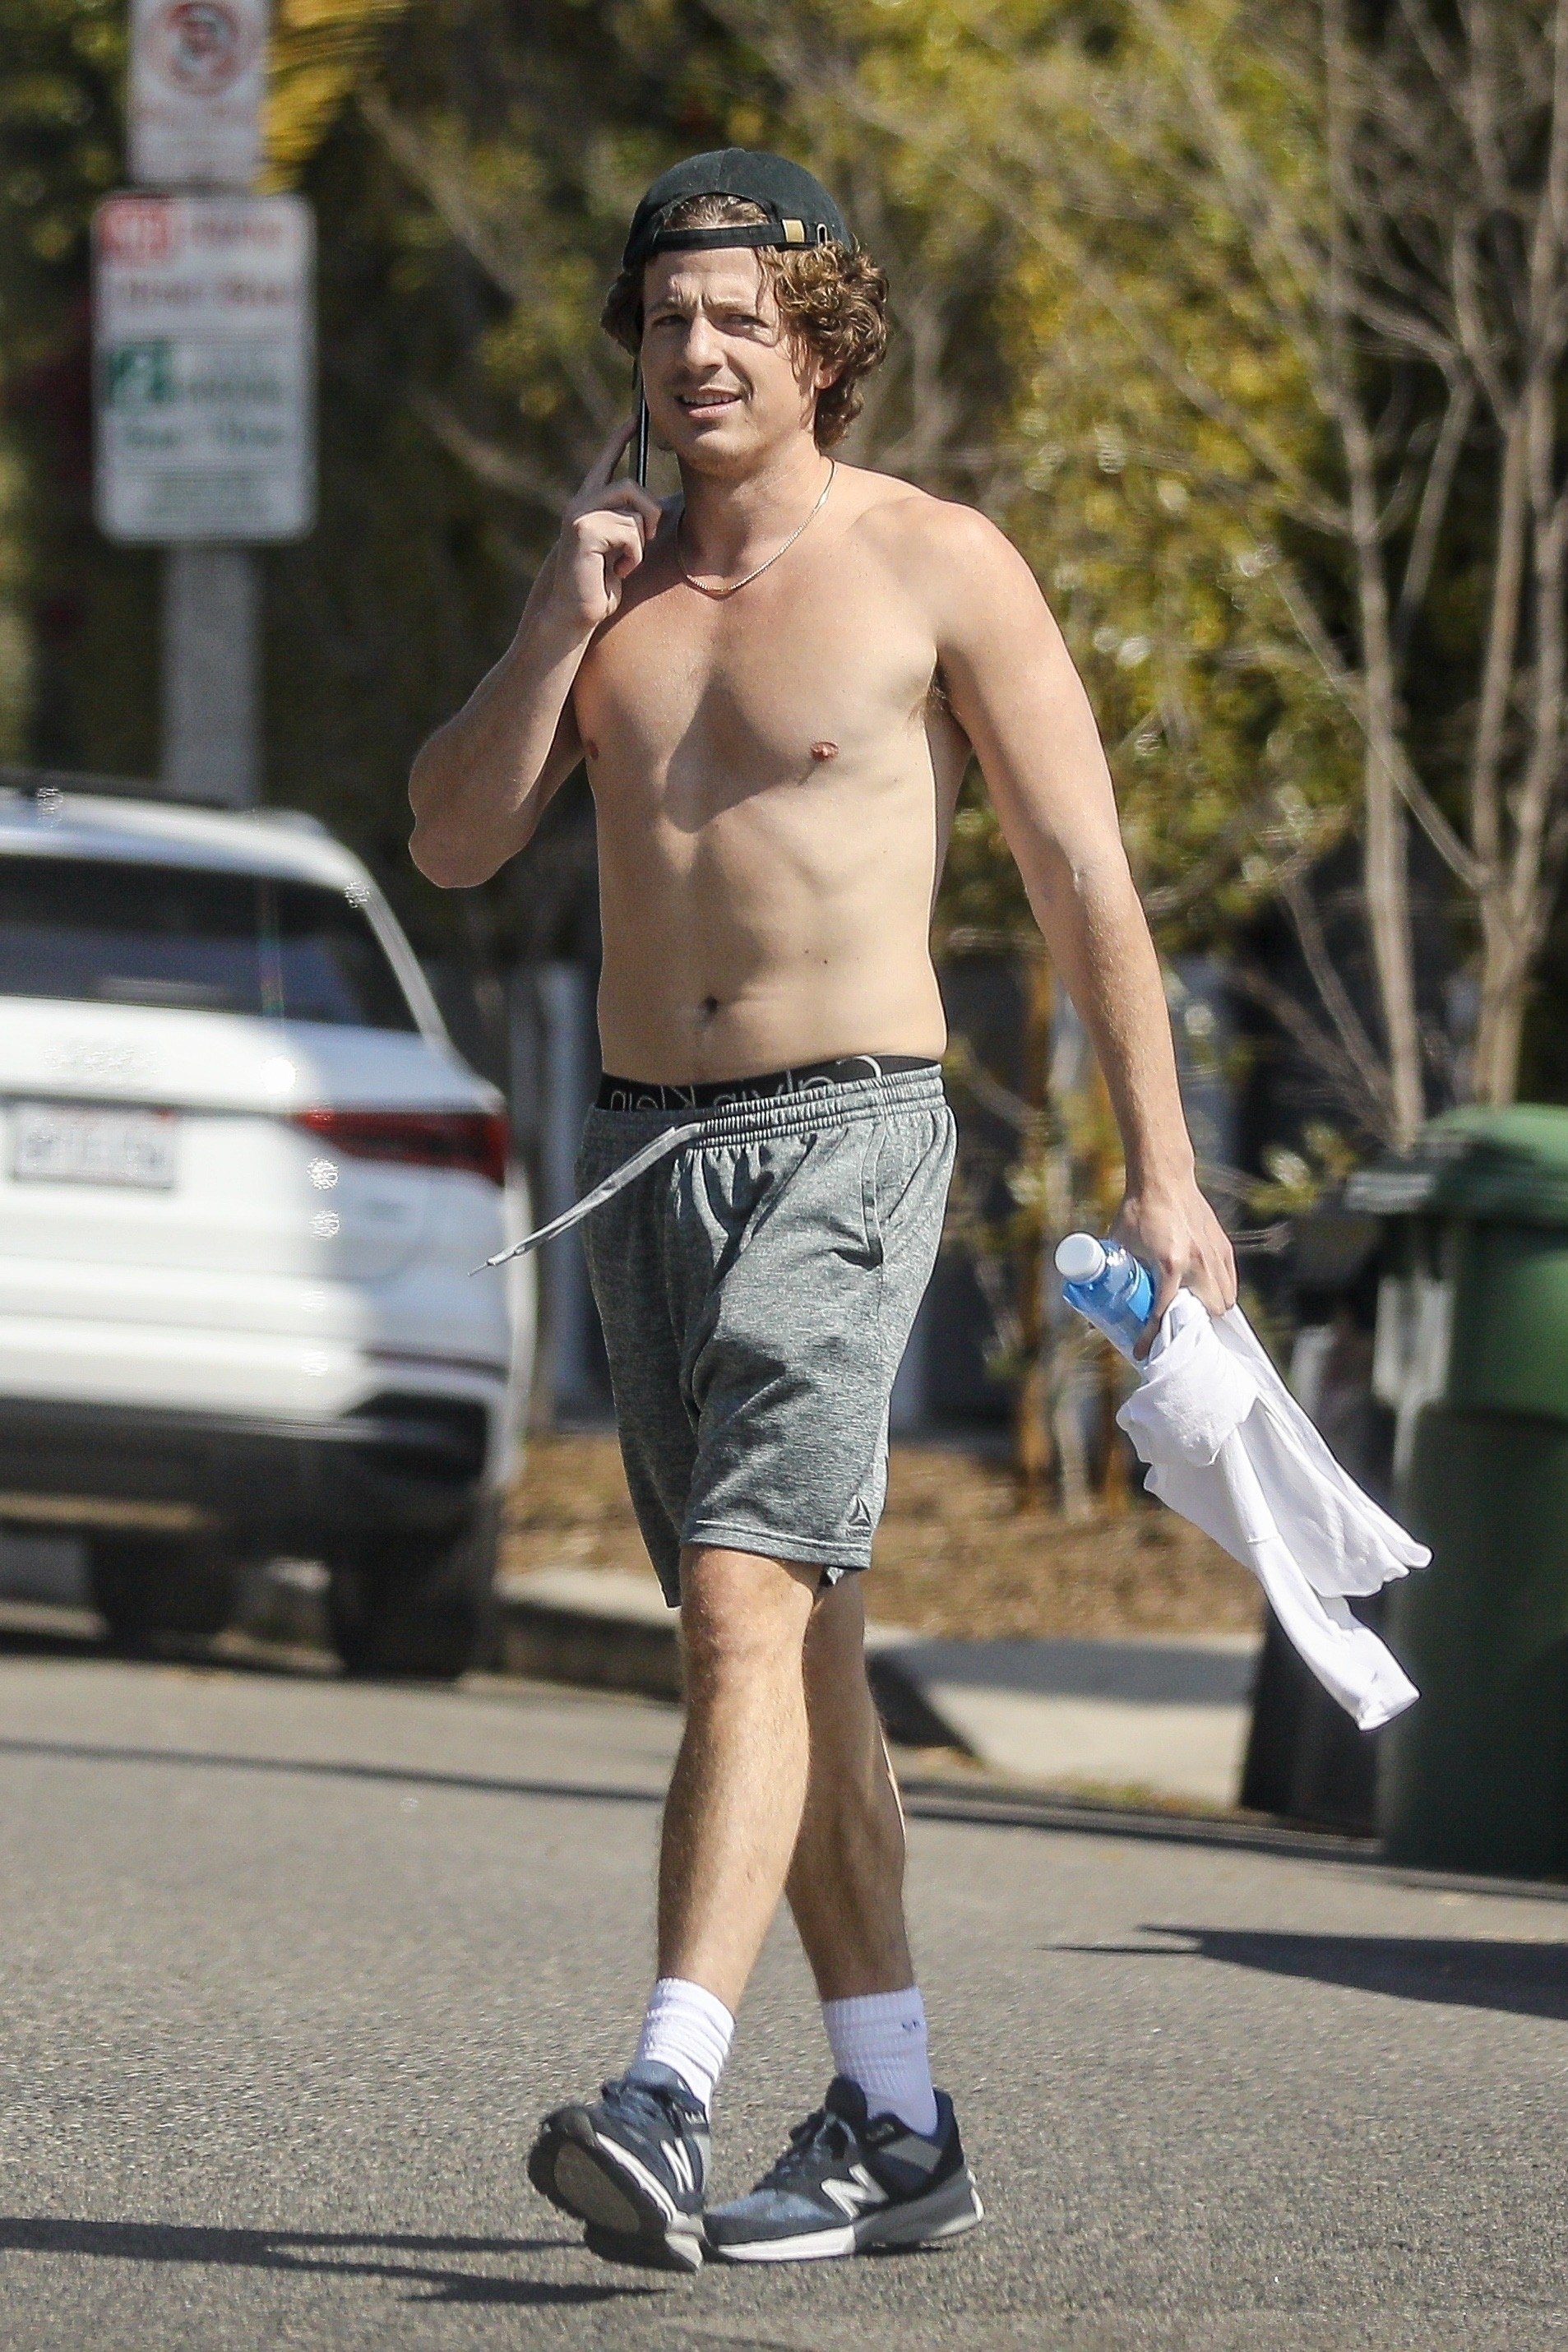 Shirtless Charlie walking, wearing shorts and sneakers, and holding a phone, T-shirt, and cellphone